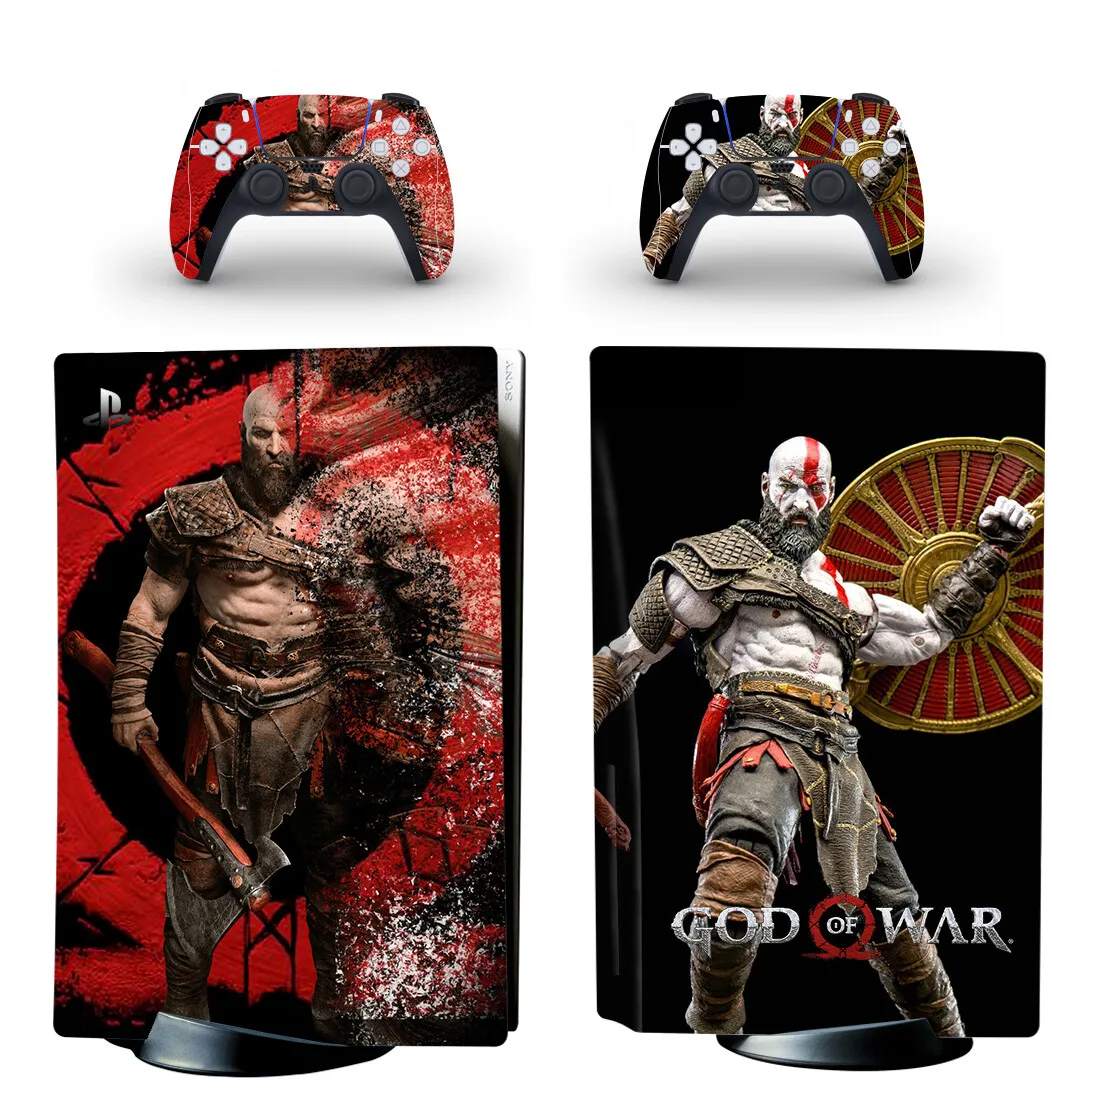 God of War PS5 Disc Skin Sticker Decal Cover for PlayStation 5 Console & Controllers PS5 Blue Ray Disk Skin Sticker Vinyl